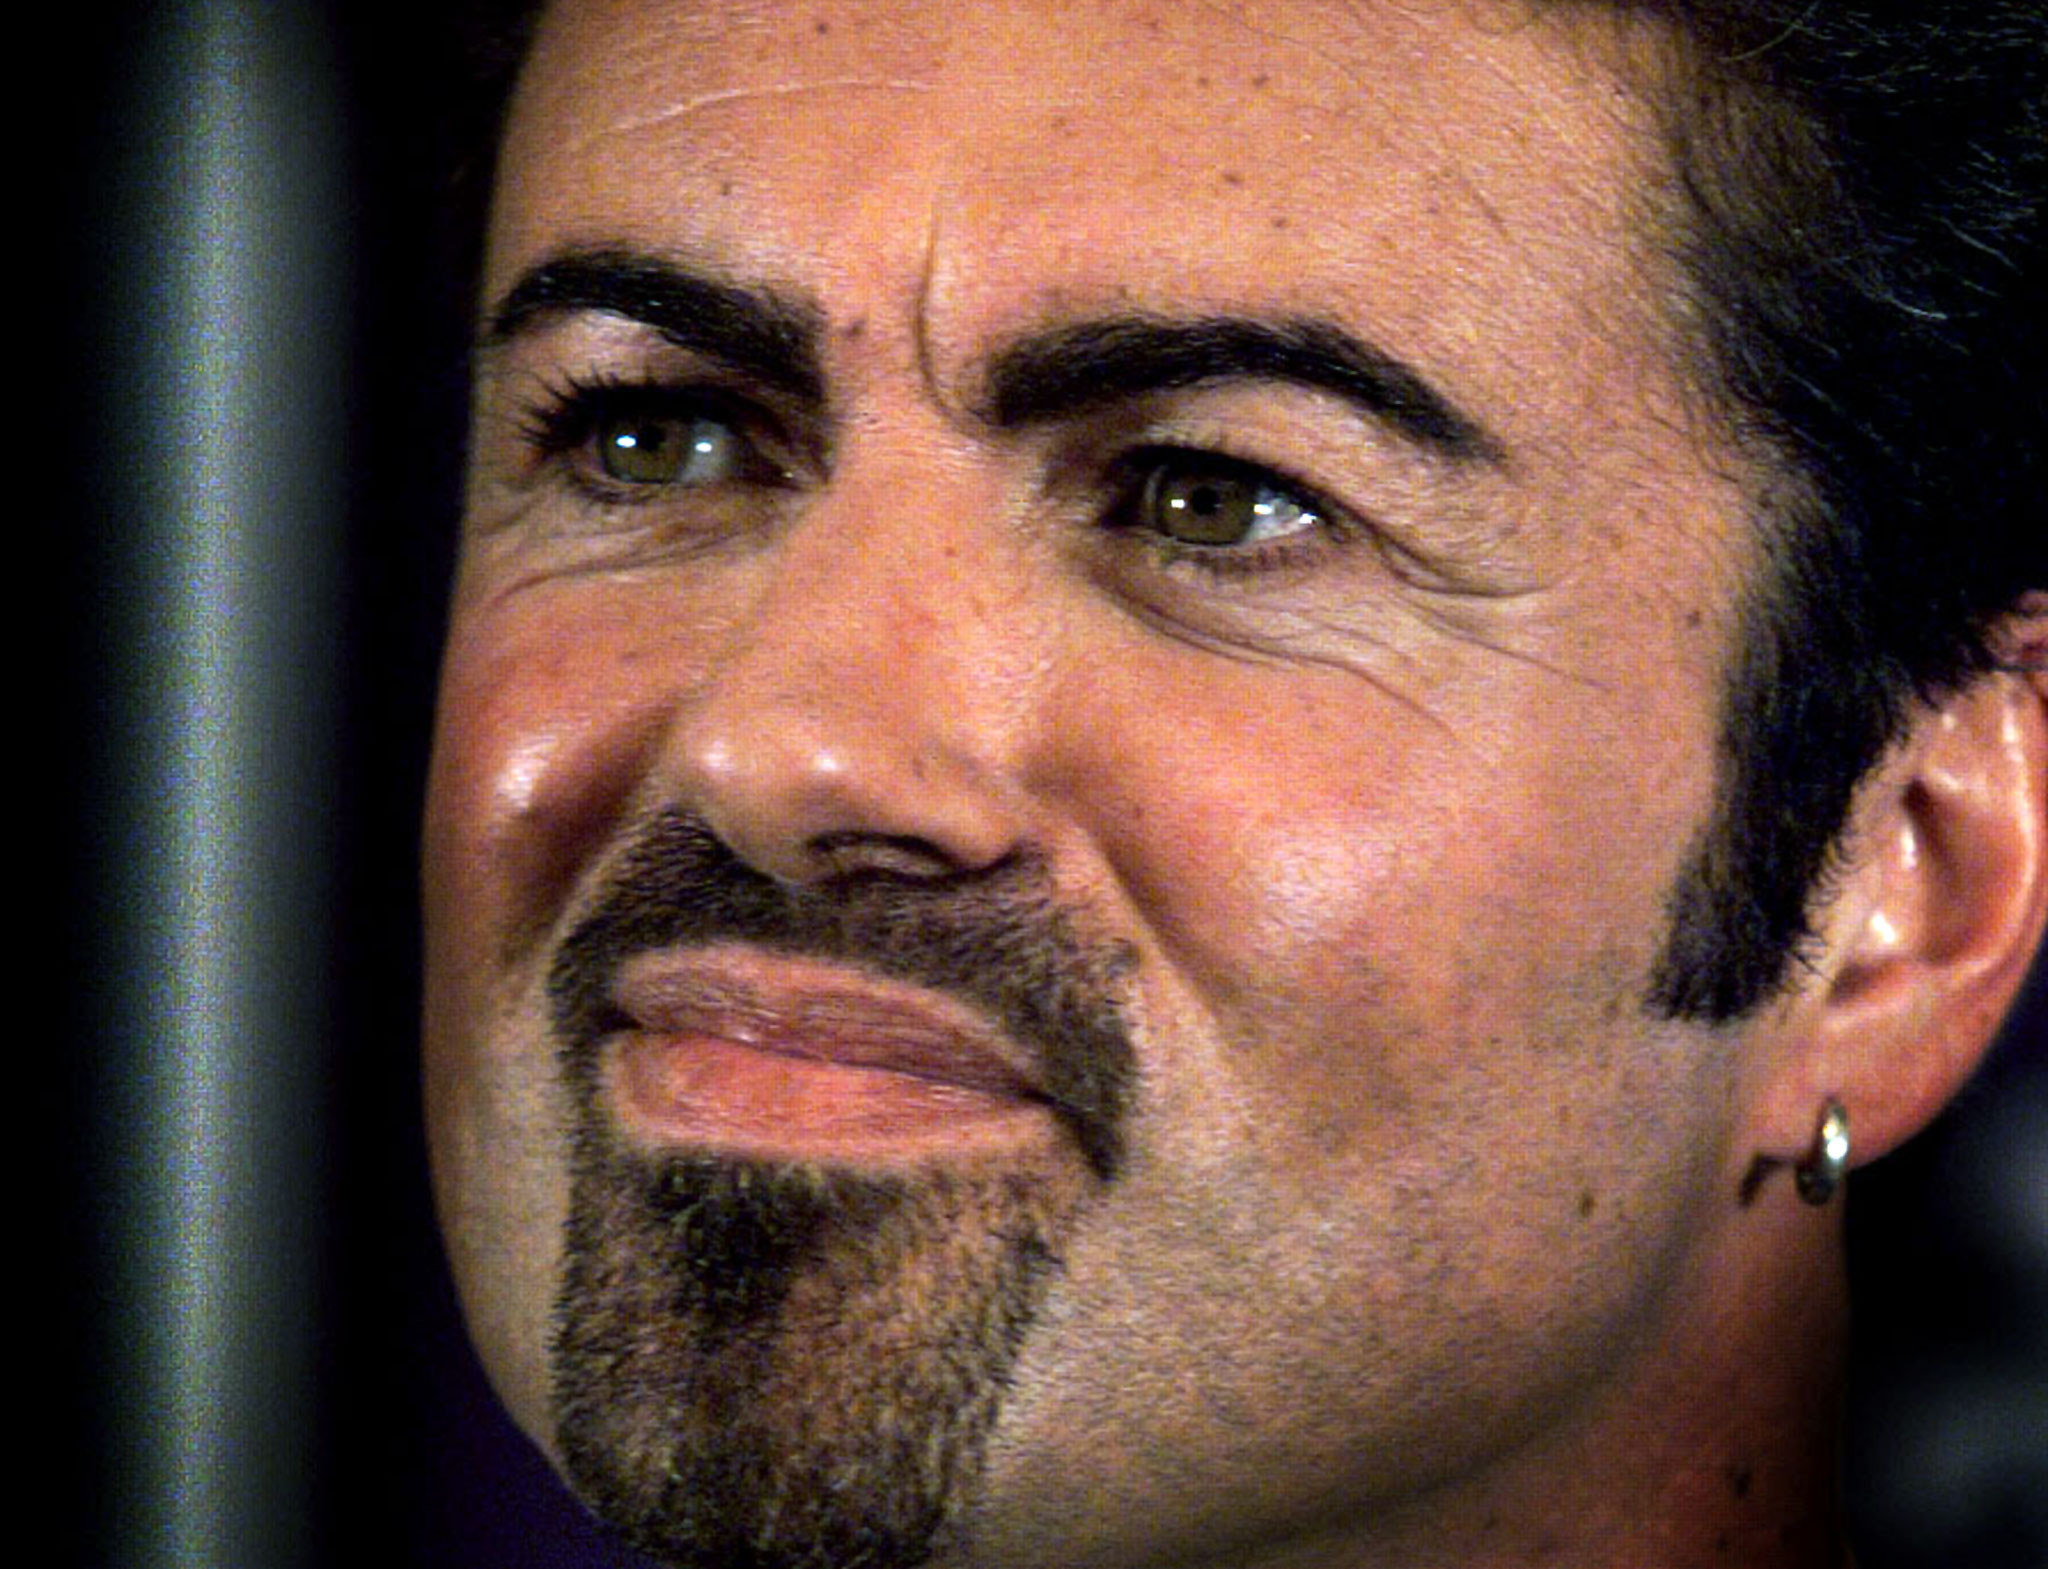 george michael the biography